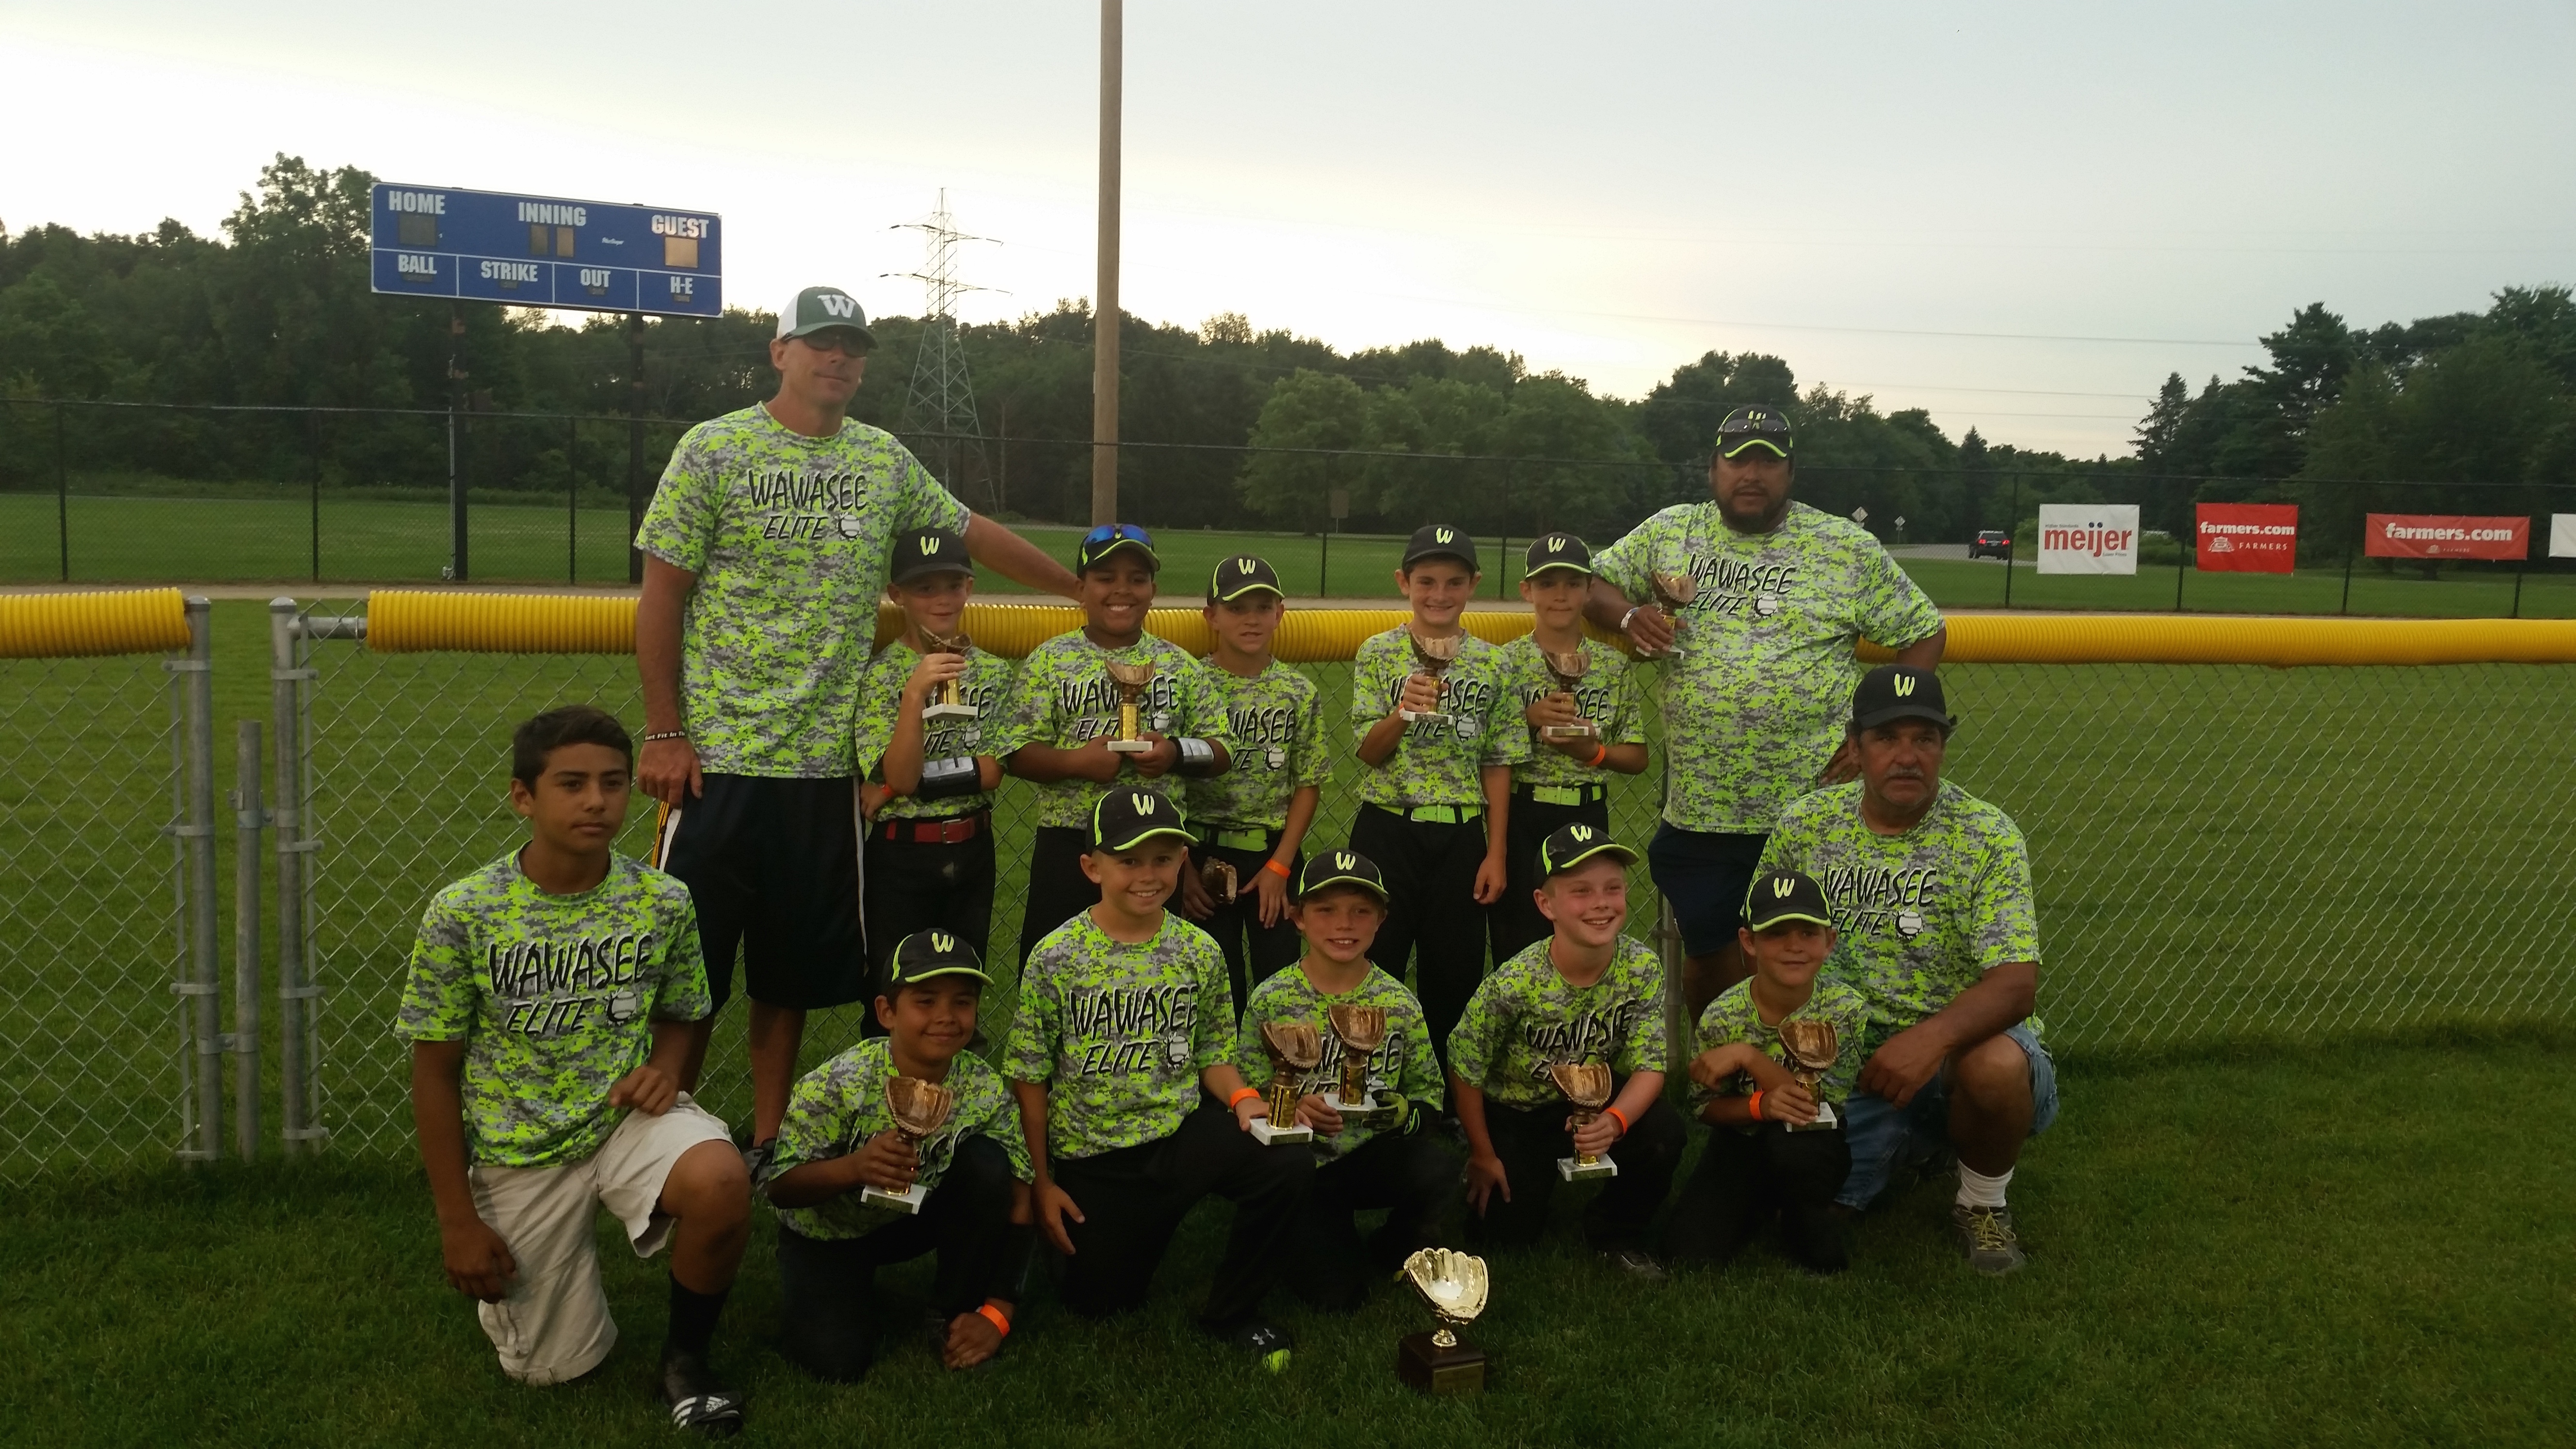 The Wawasee Elite 9U team recently placed third in the BPA World Series (Photo provided by Mindy Brooks)